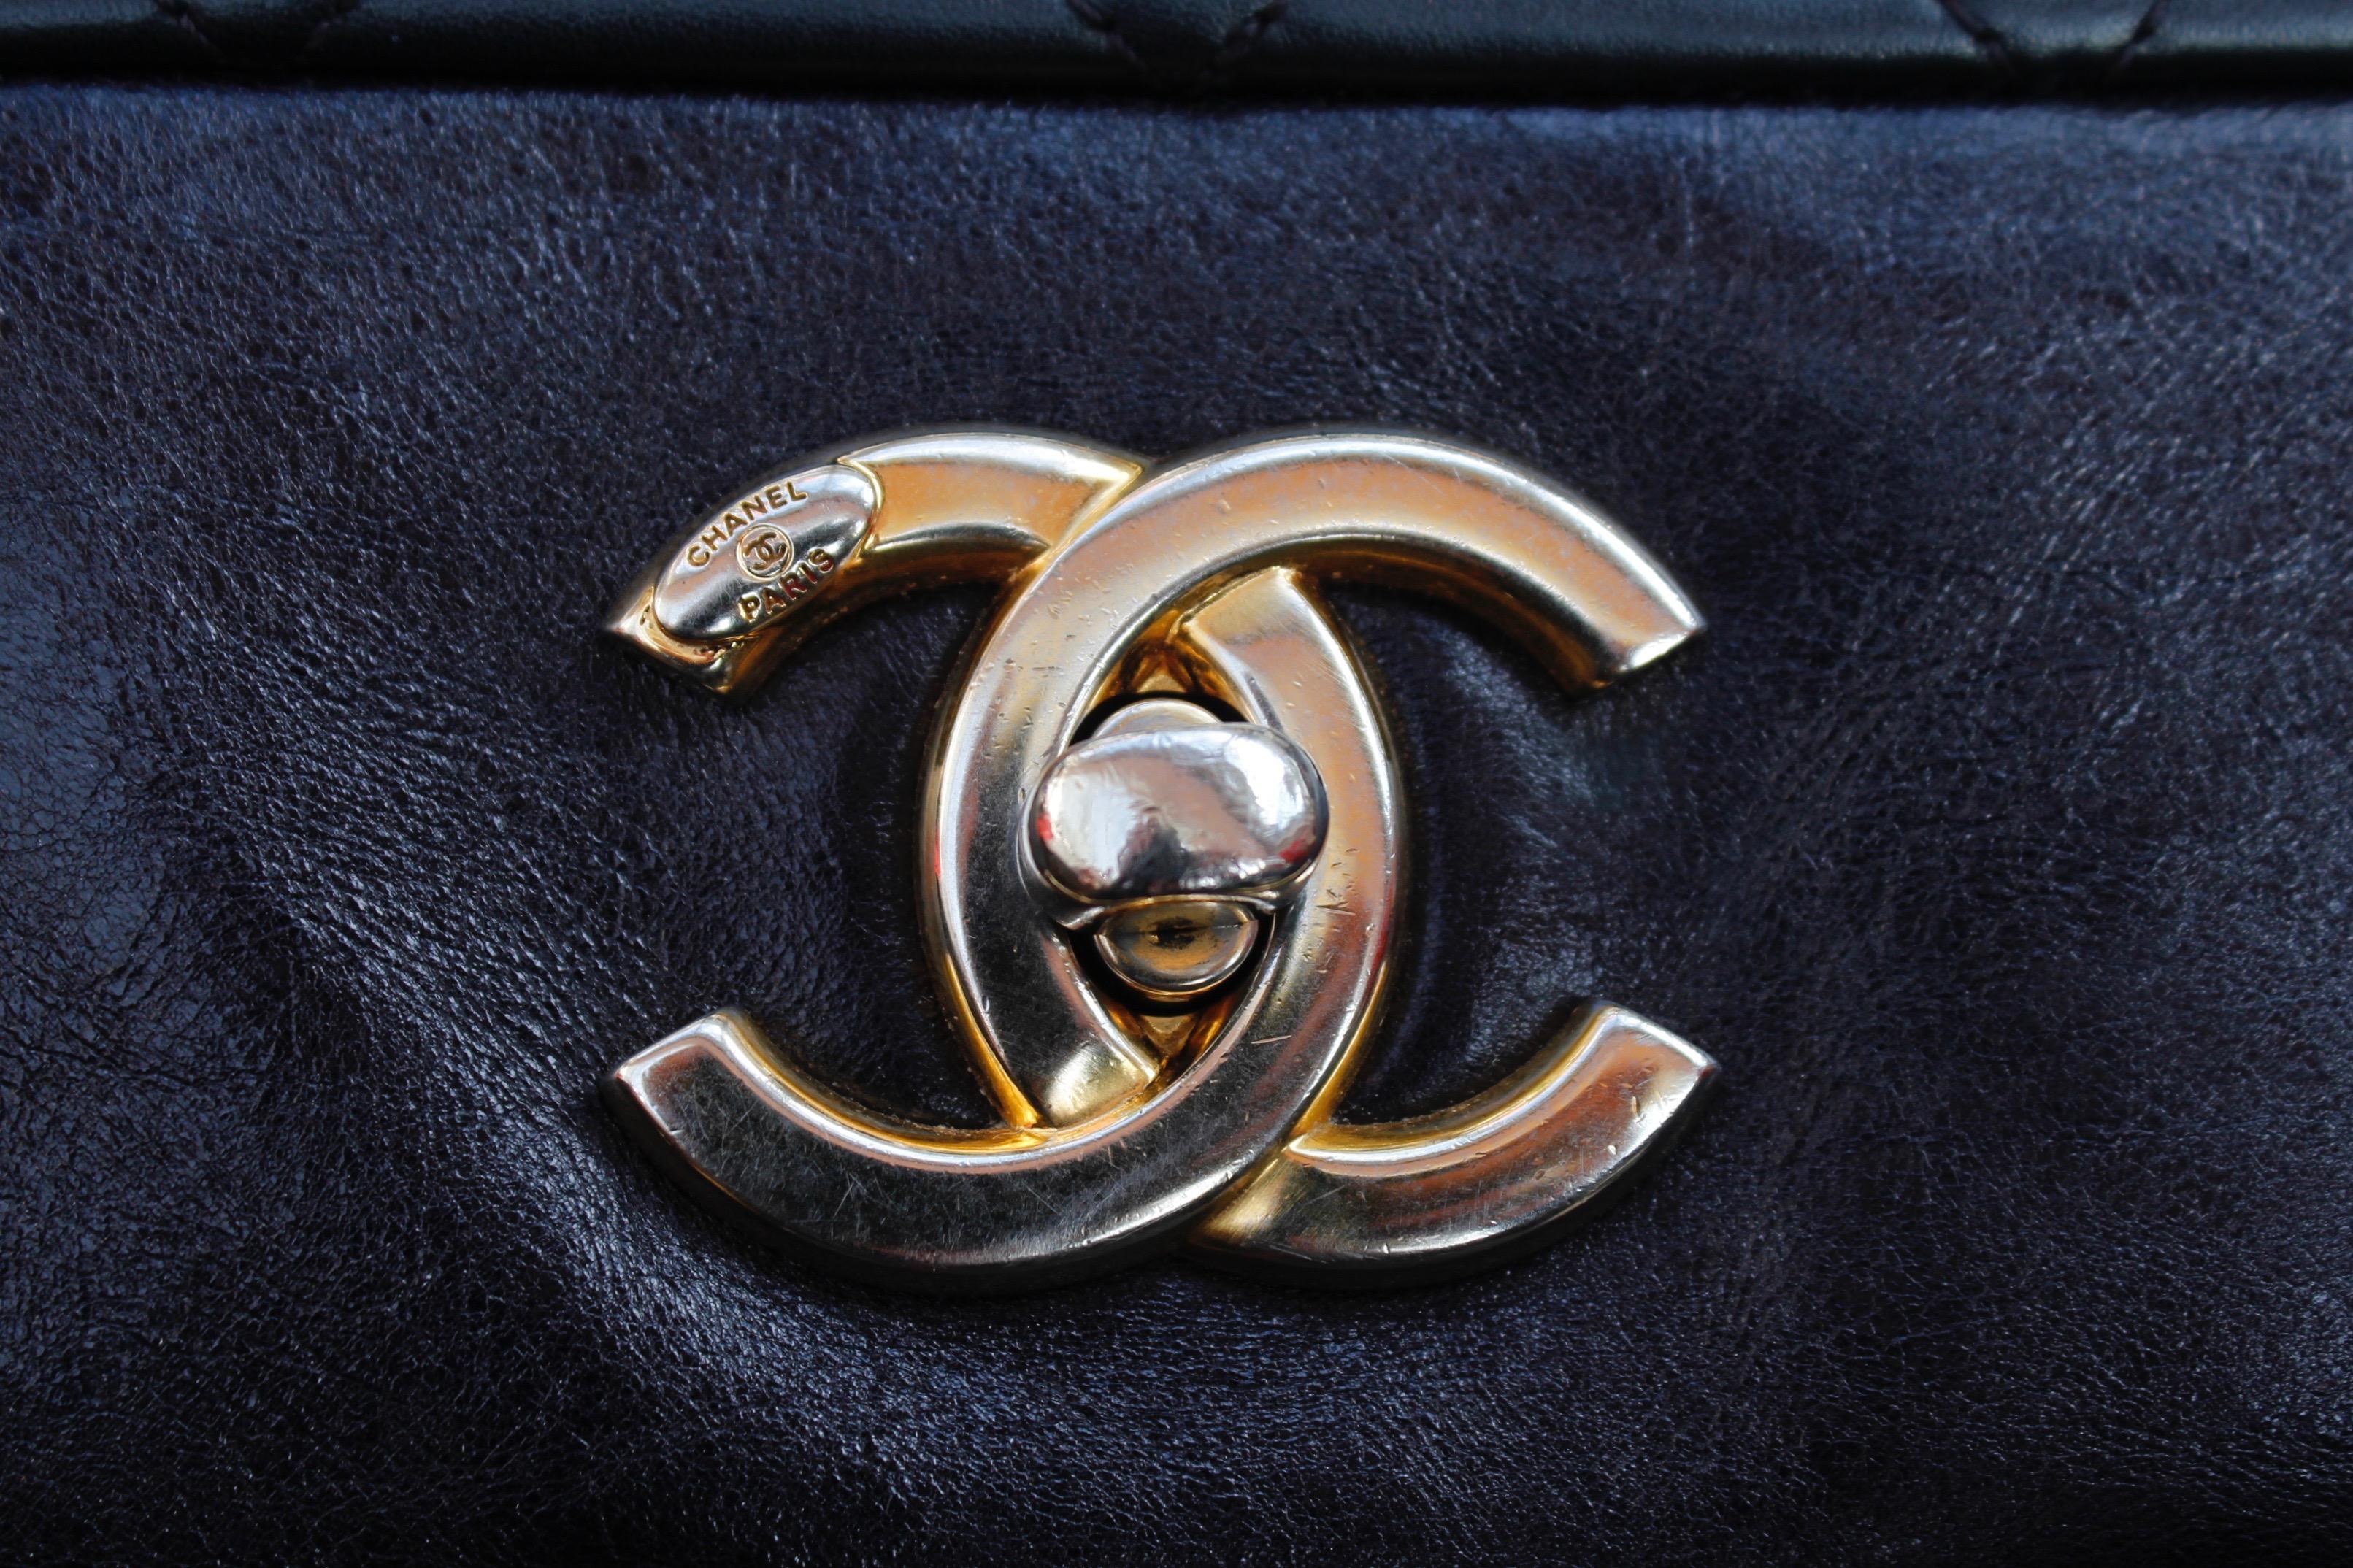 Chanel beautiful smooth and quilted leather bag, 2012/2013 For Sale 5